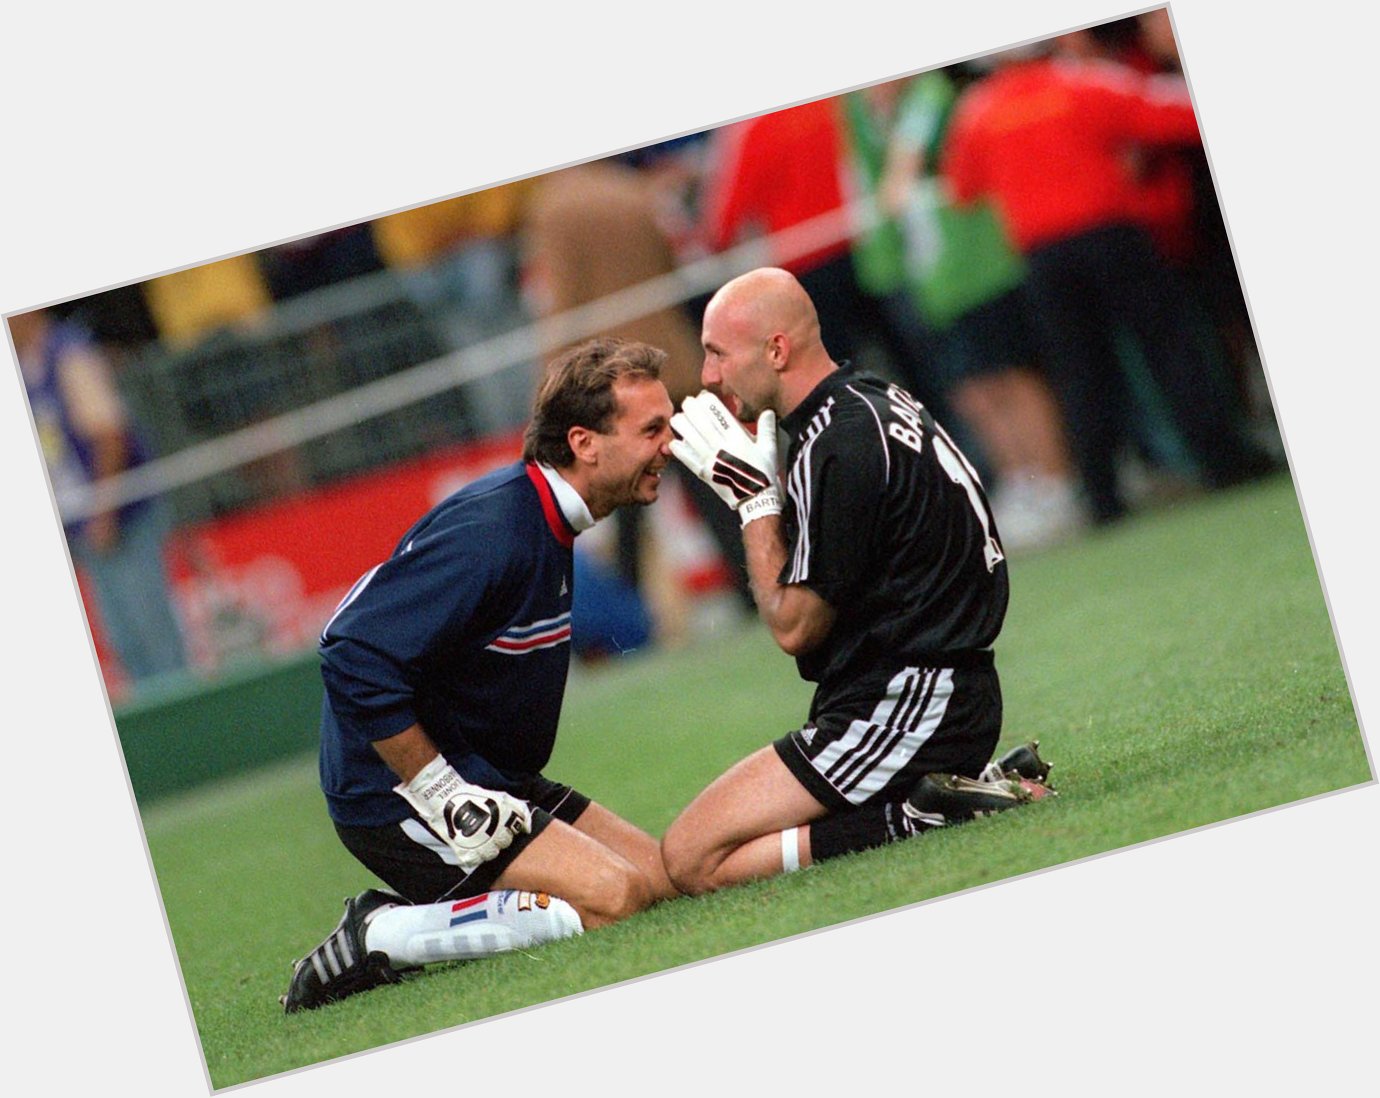 We wish a very happy birthday to one of the great goalkeepers, Fabien Barthez!   